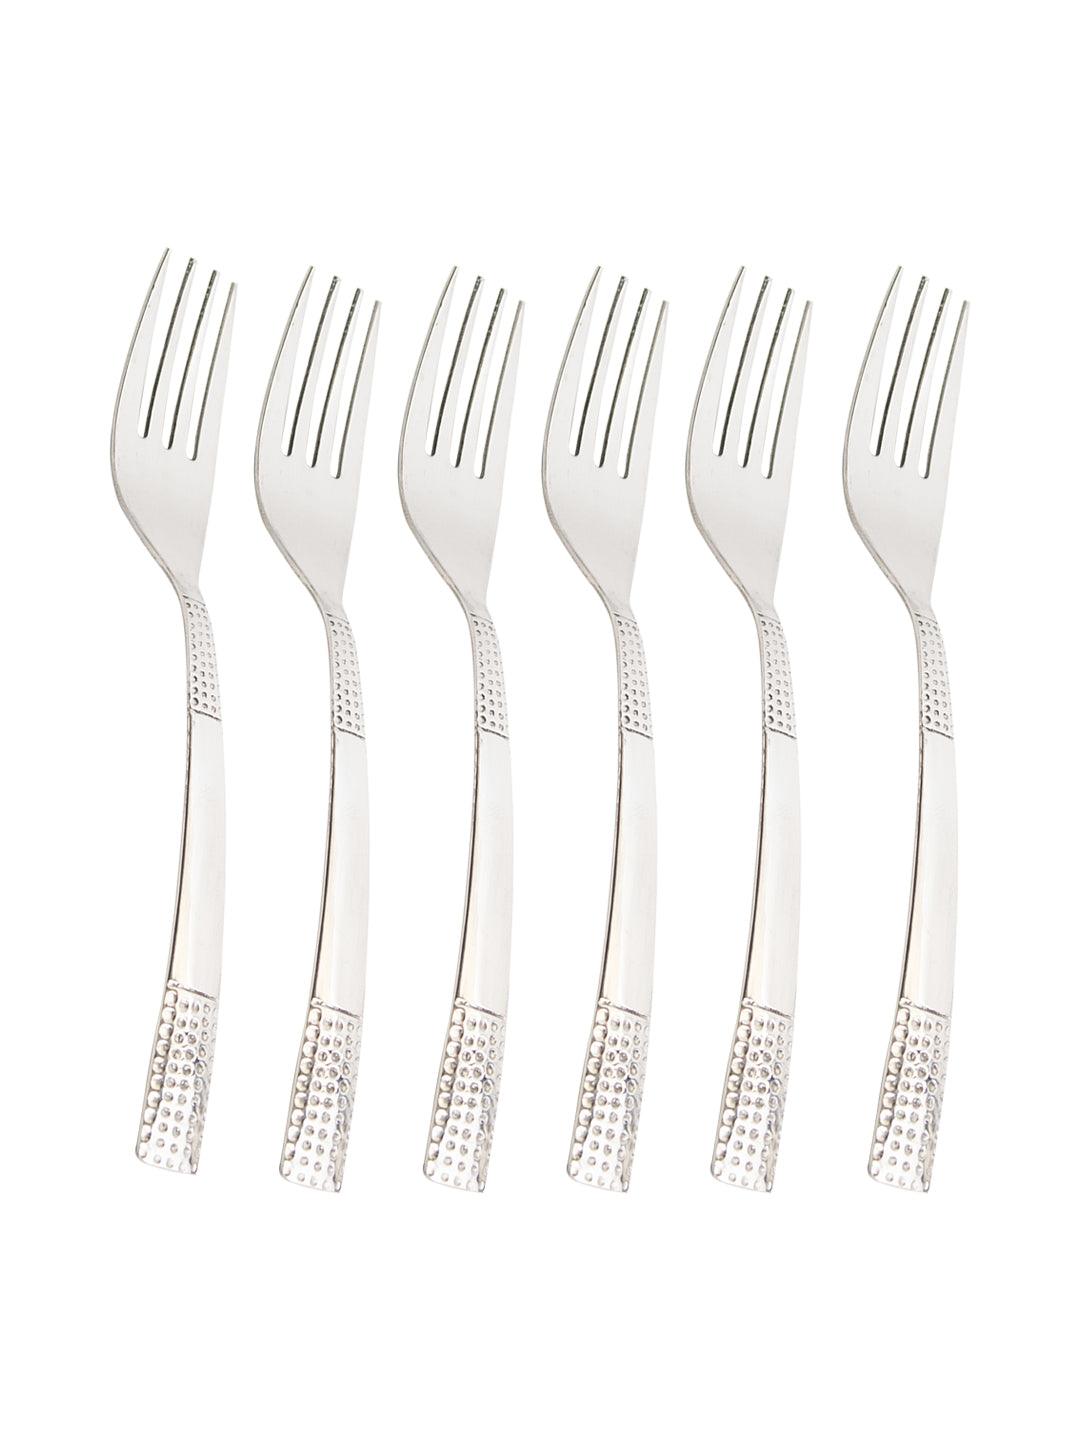 Pinti Dot Steel Tableware Cutlery Set Of 18 Pcs With Stand in Silver Colour - MARKET 99